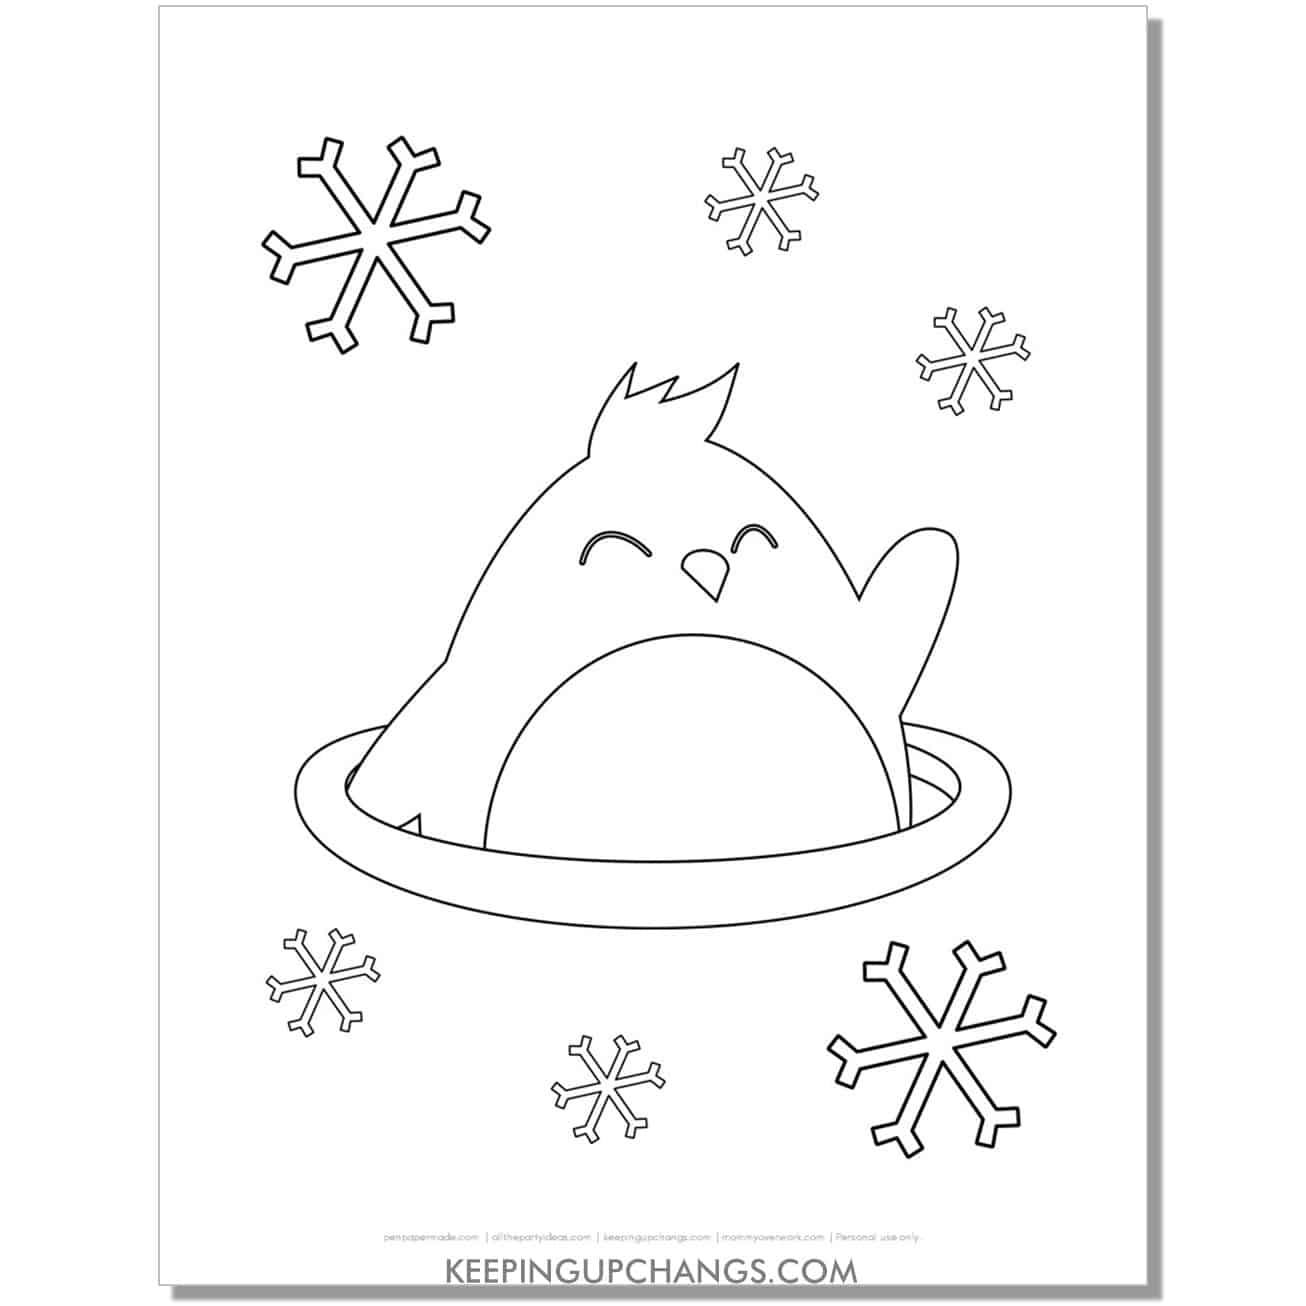 free winter penguin in ice fishing hole with snowflakes coloring page.